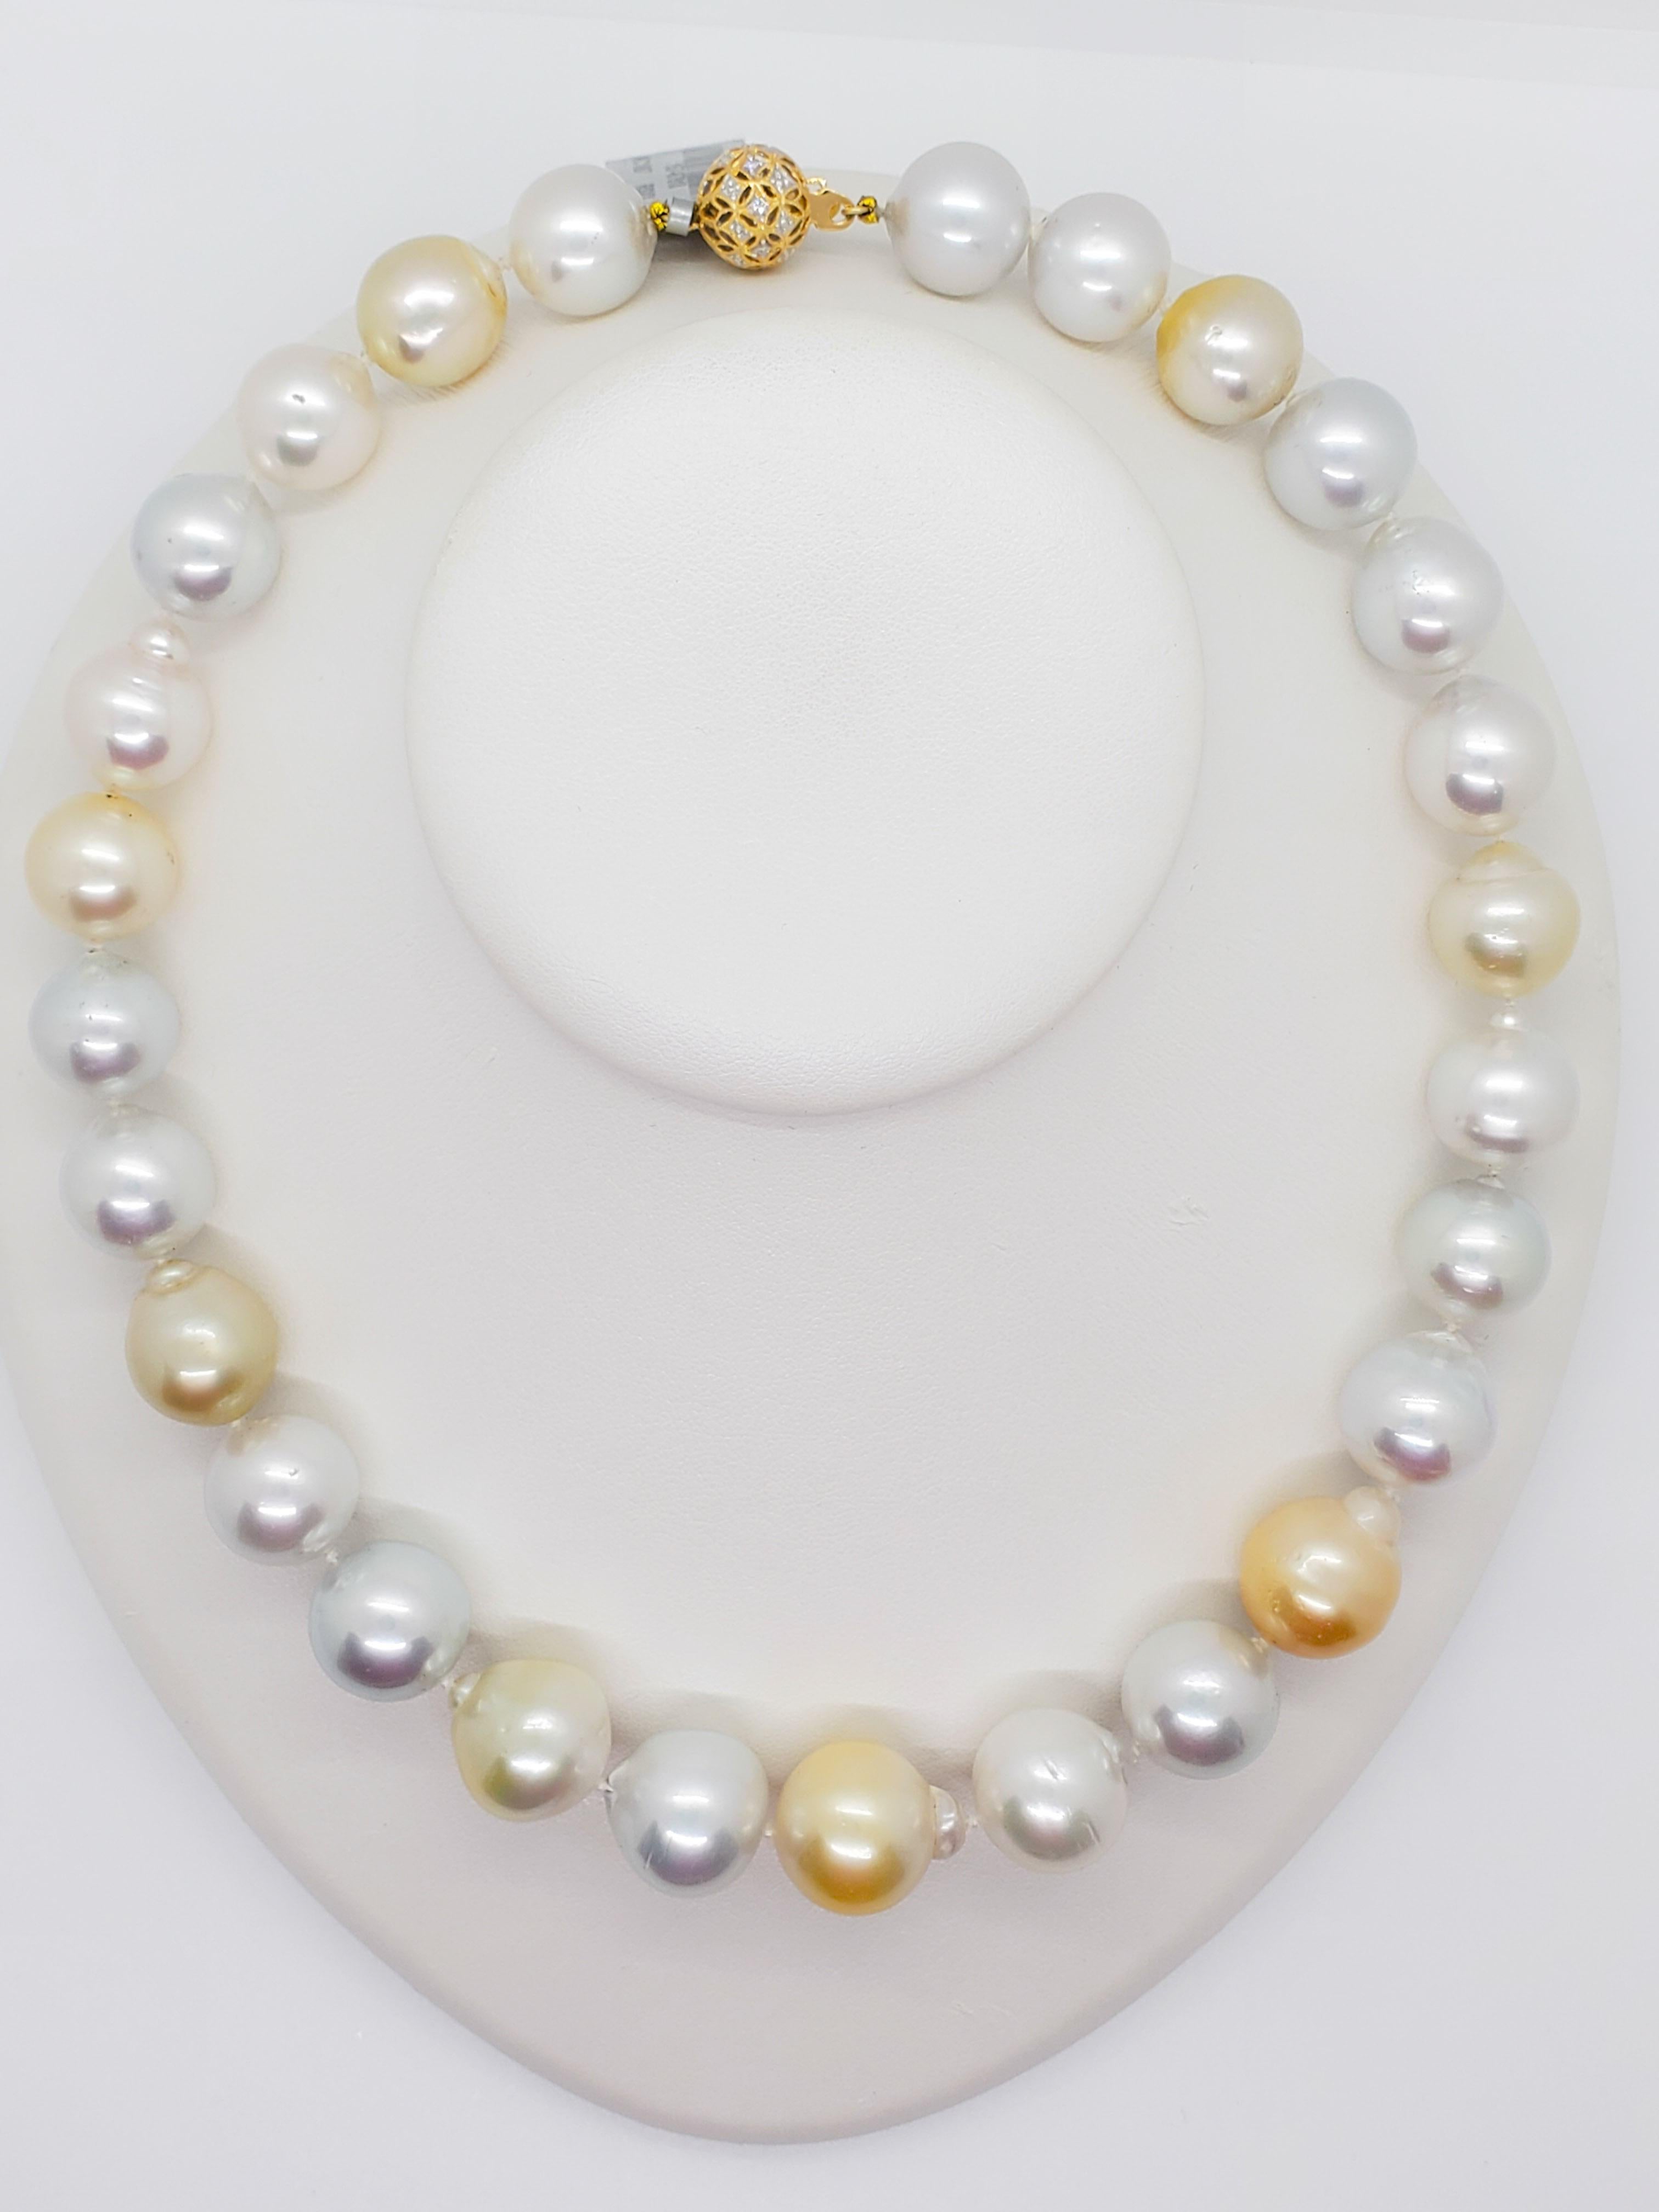 Round Cut  White and Yellow South Sea Pearl Necklace with Diamond Clasp For Sale